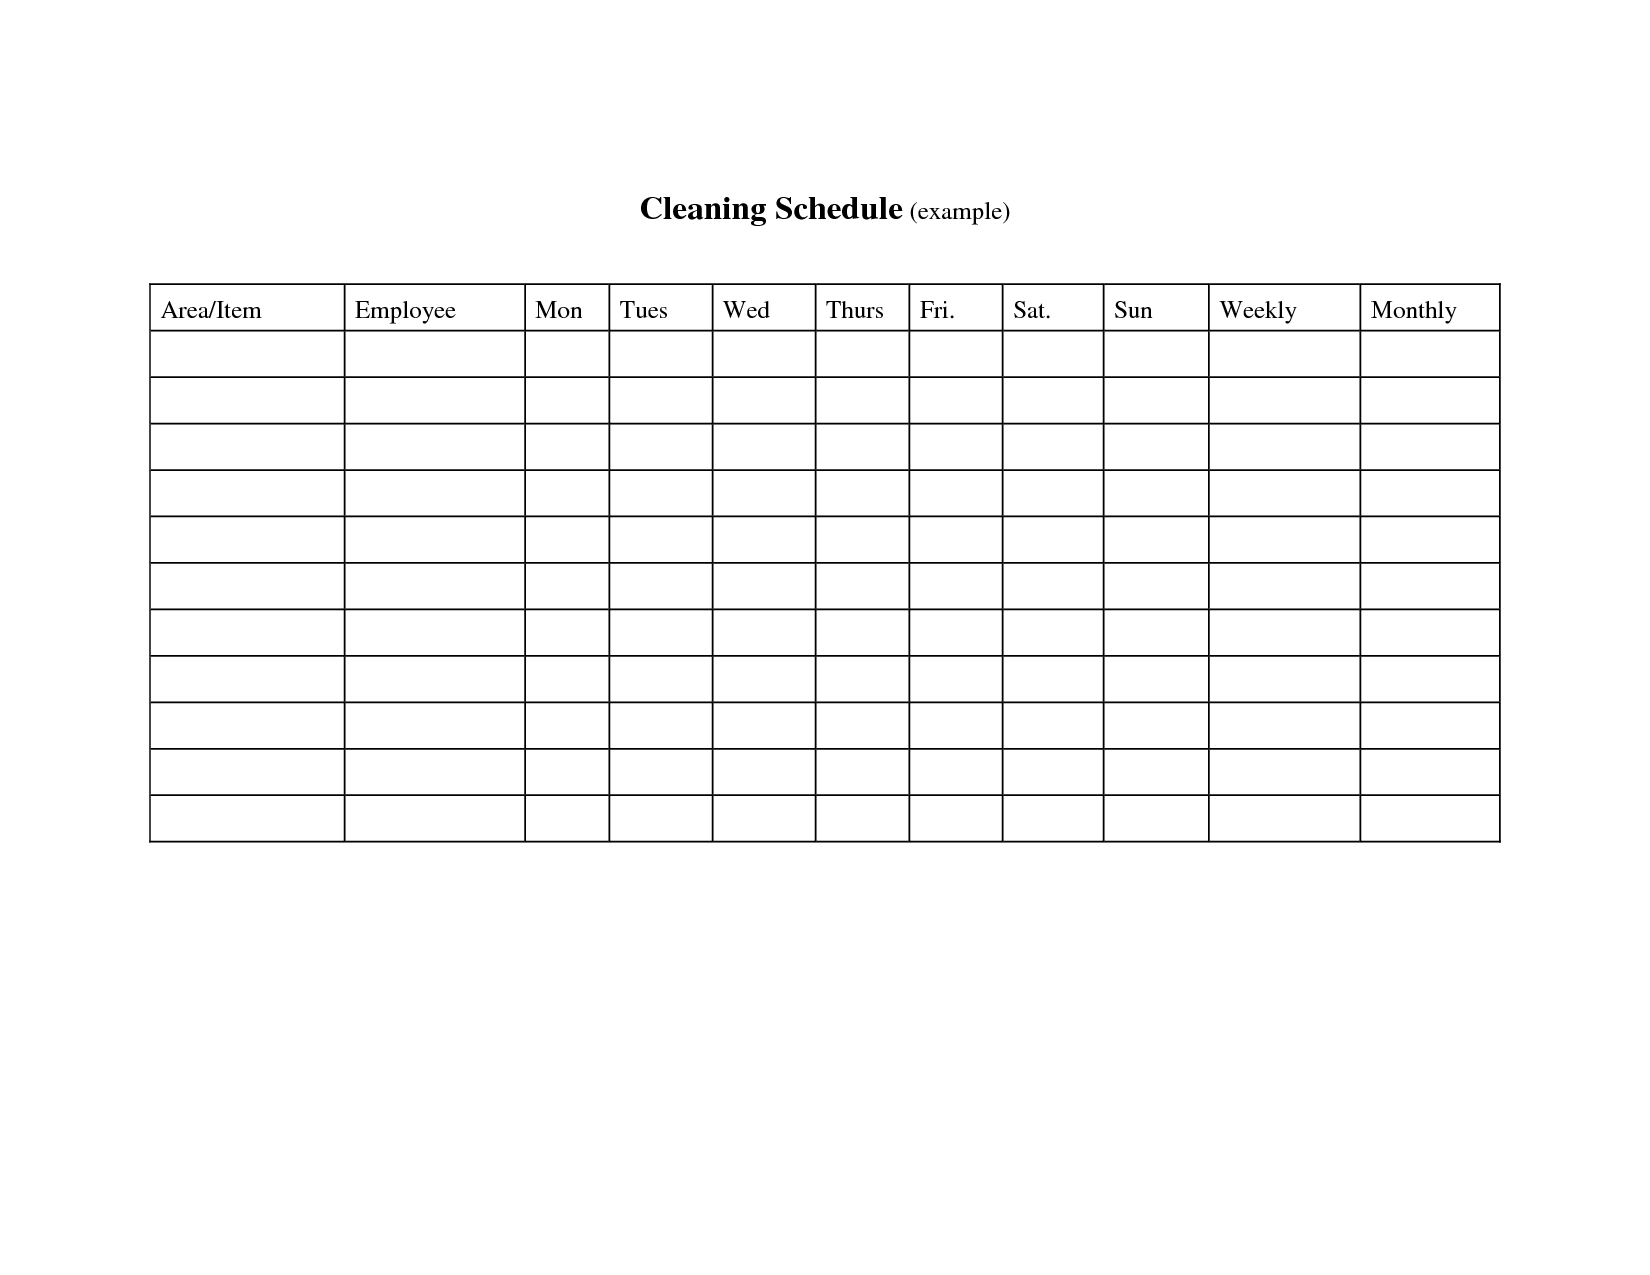 sample-blank-office-cleaning-schedule-main-image-retail-with-blank